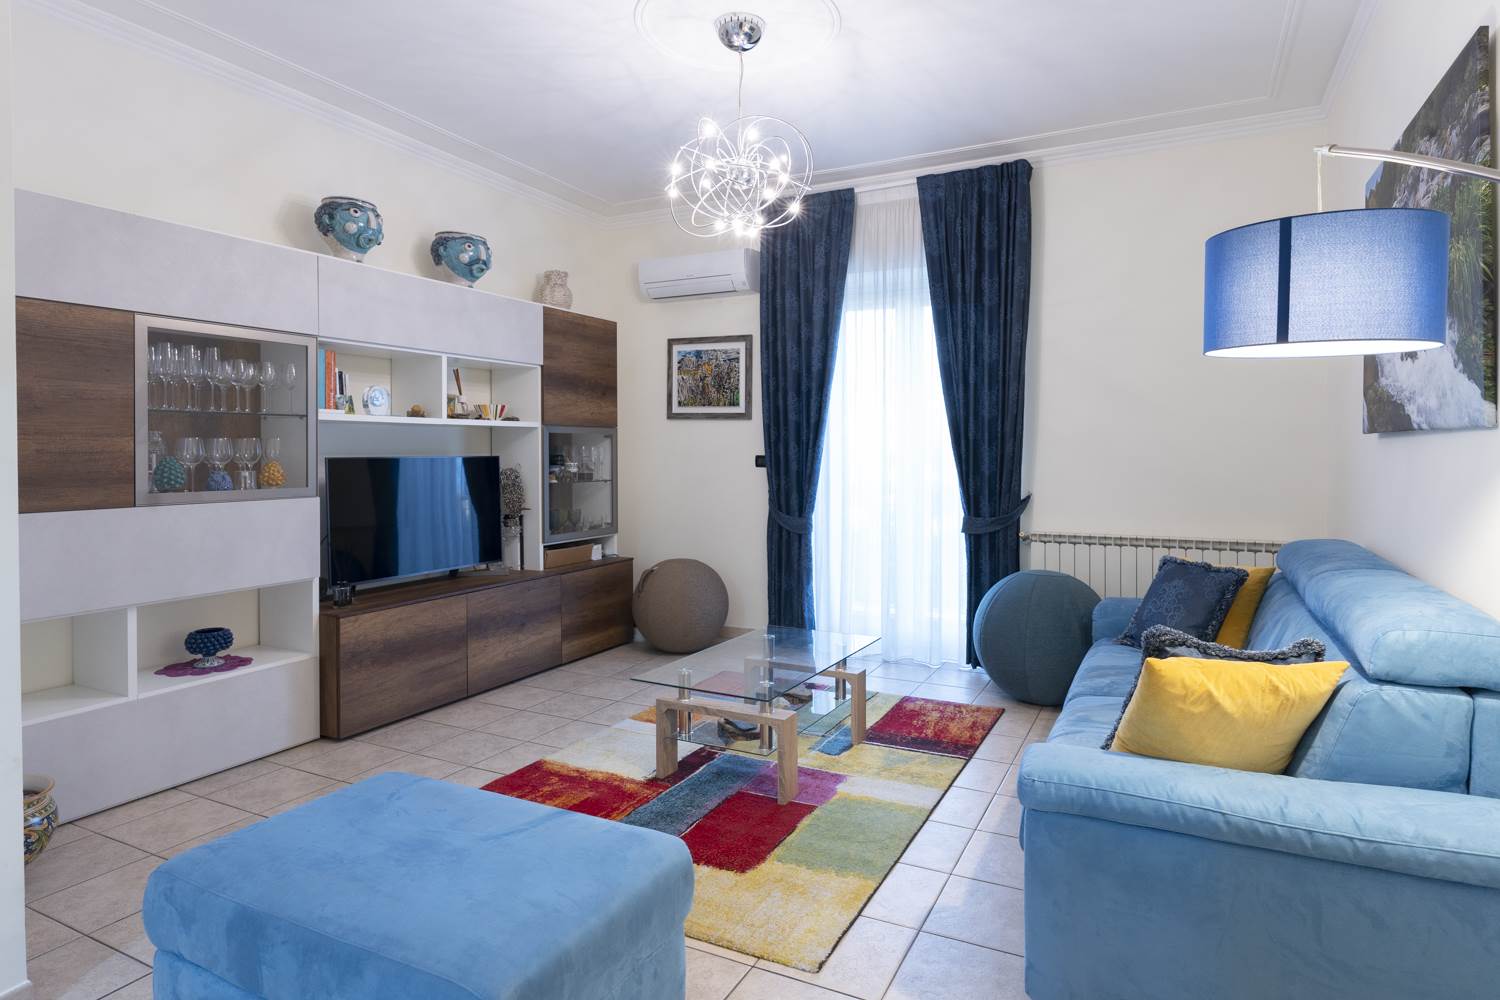 BARRIERA, CATANIA, Apartment for sale of 86 Sq. mt., Excellent Condition, Heating Individual heating system, placed at 4° on 5, composed by: 3 Rooms, 